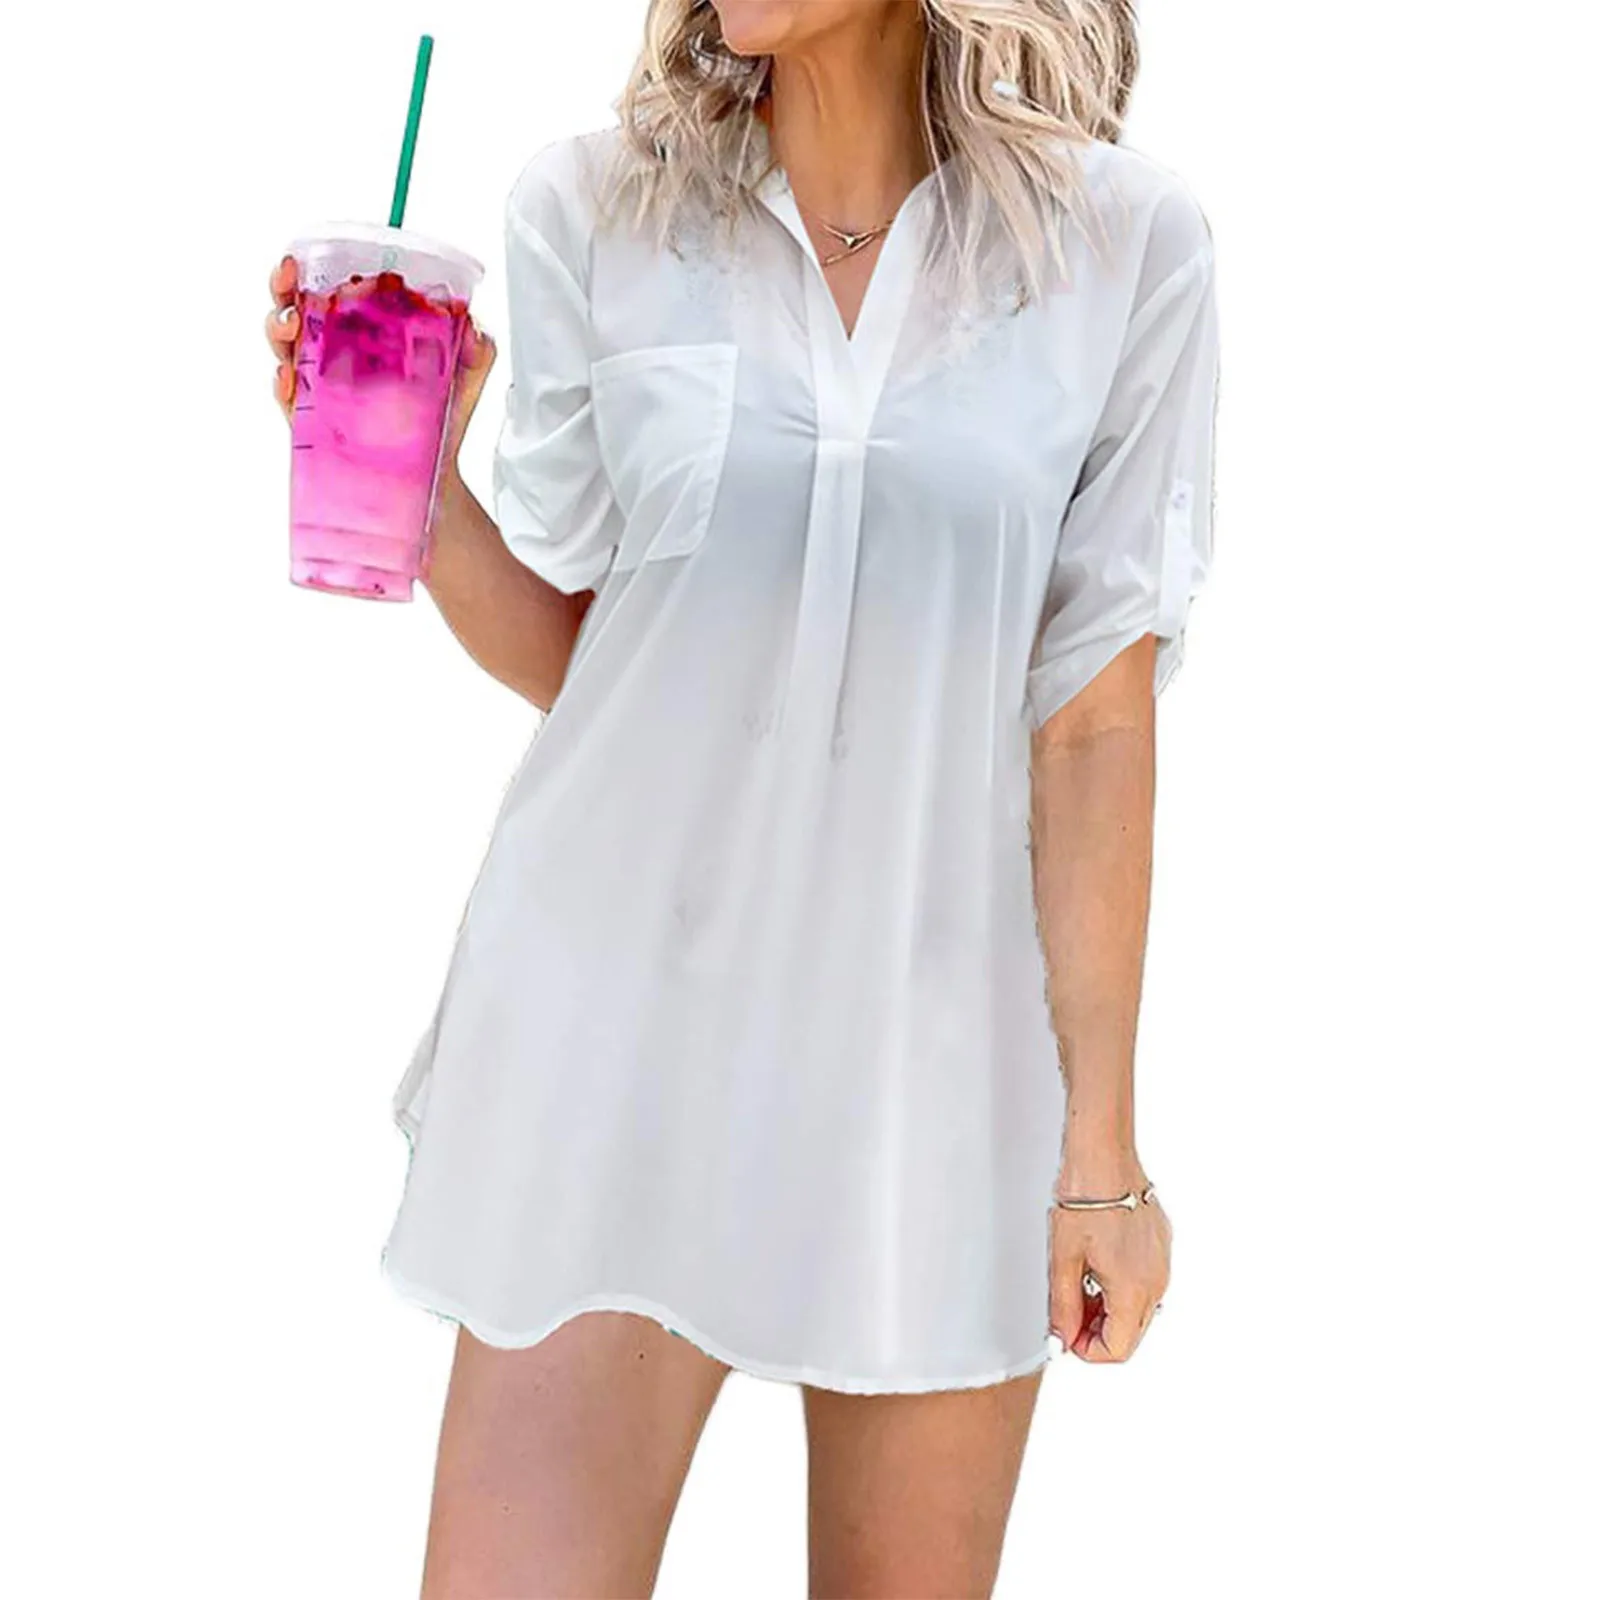 Women's Bikini Cover-up Sexy Swimsuit Cover Ups Summer Bathing Suit Beach Coverups Beach Casual Dress Tops Купальник Женский bathing suit wrap cover up